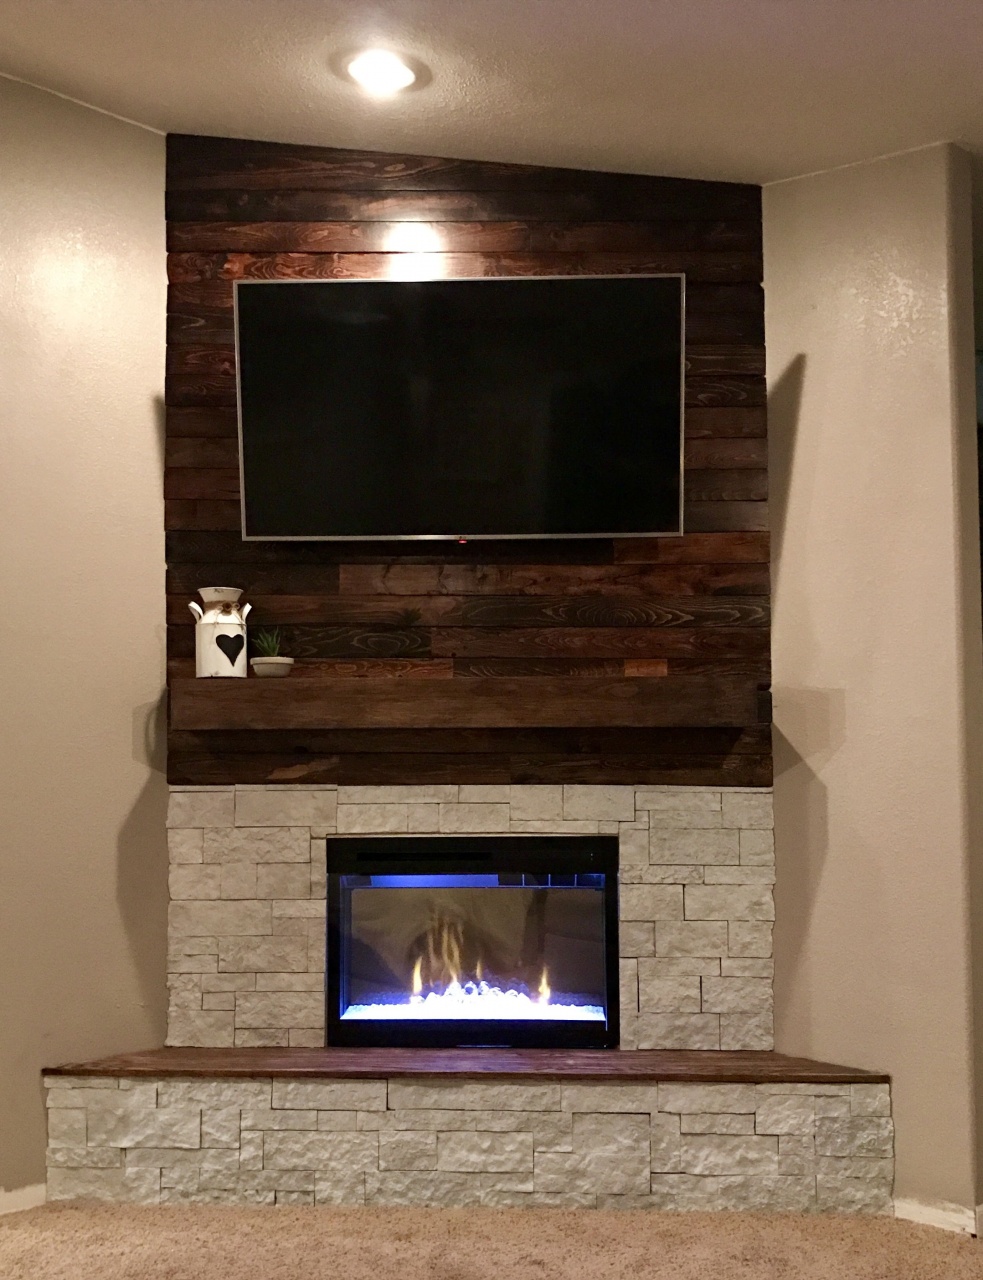 Tv and Fire Wall Lovely Home Depot White Electric Fireplace – Fireplace Ideas From